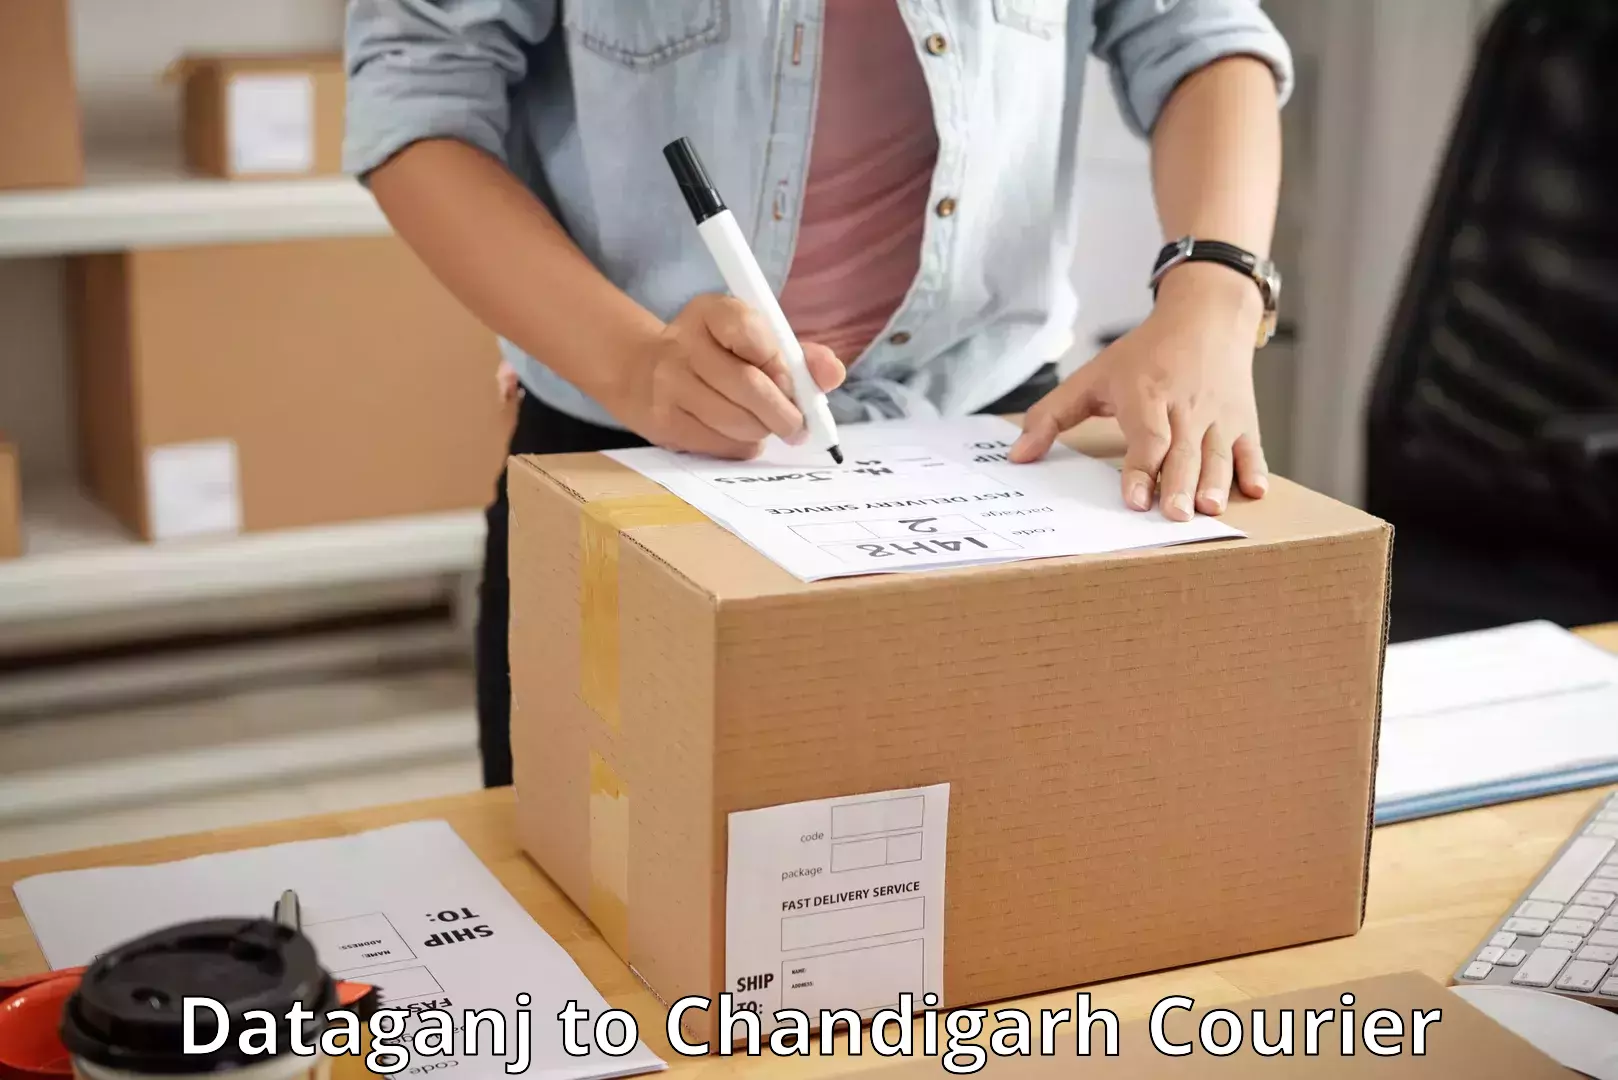 Reliable parcel services Dataganj to Chandigarh